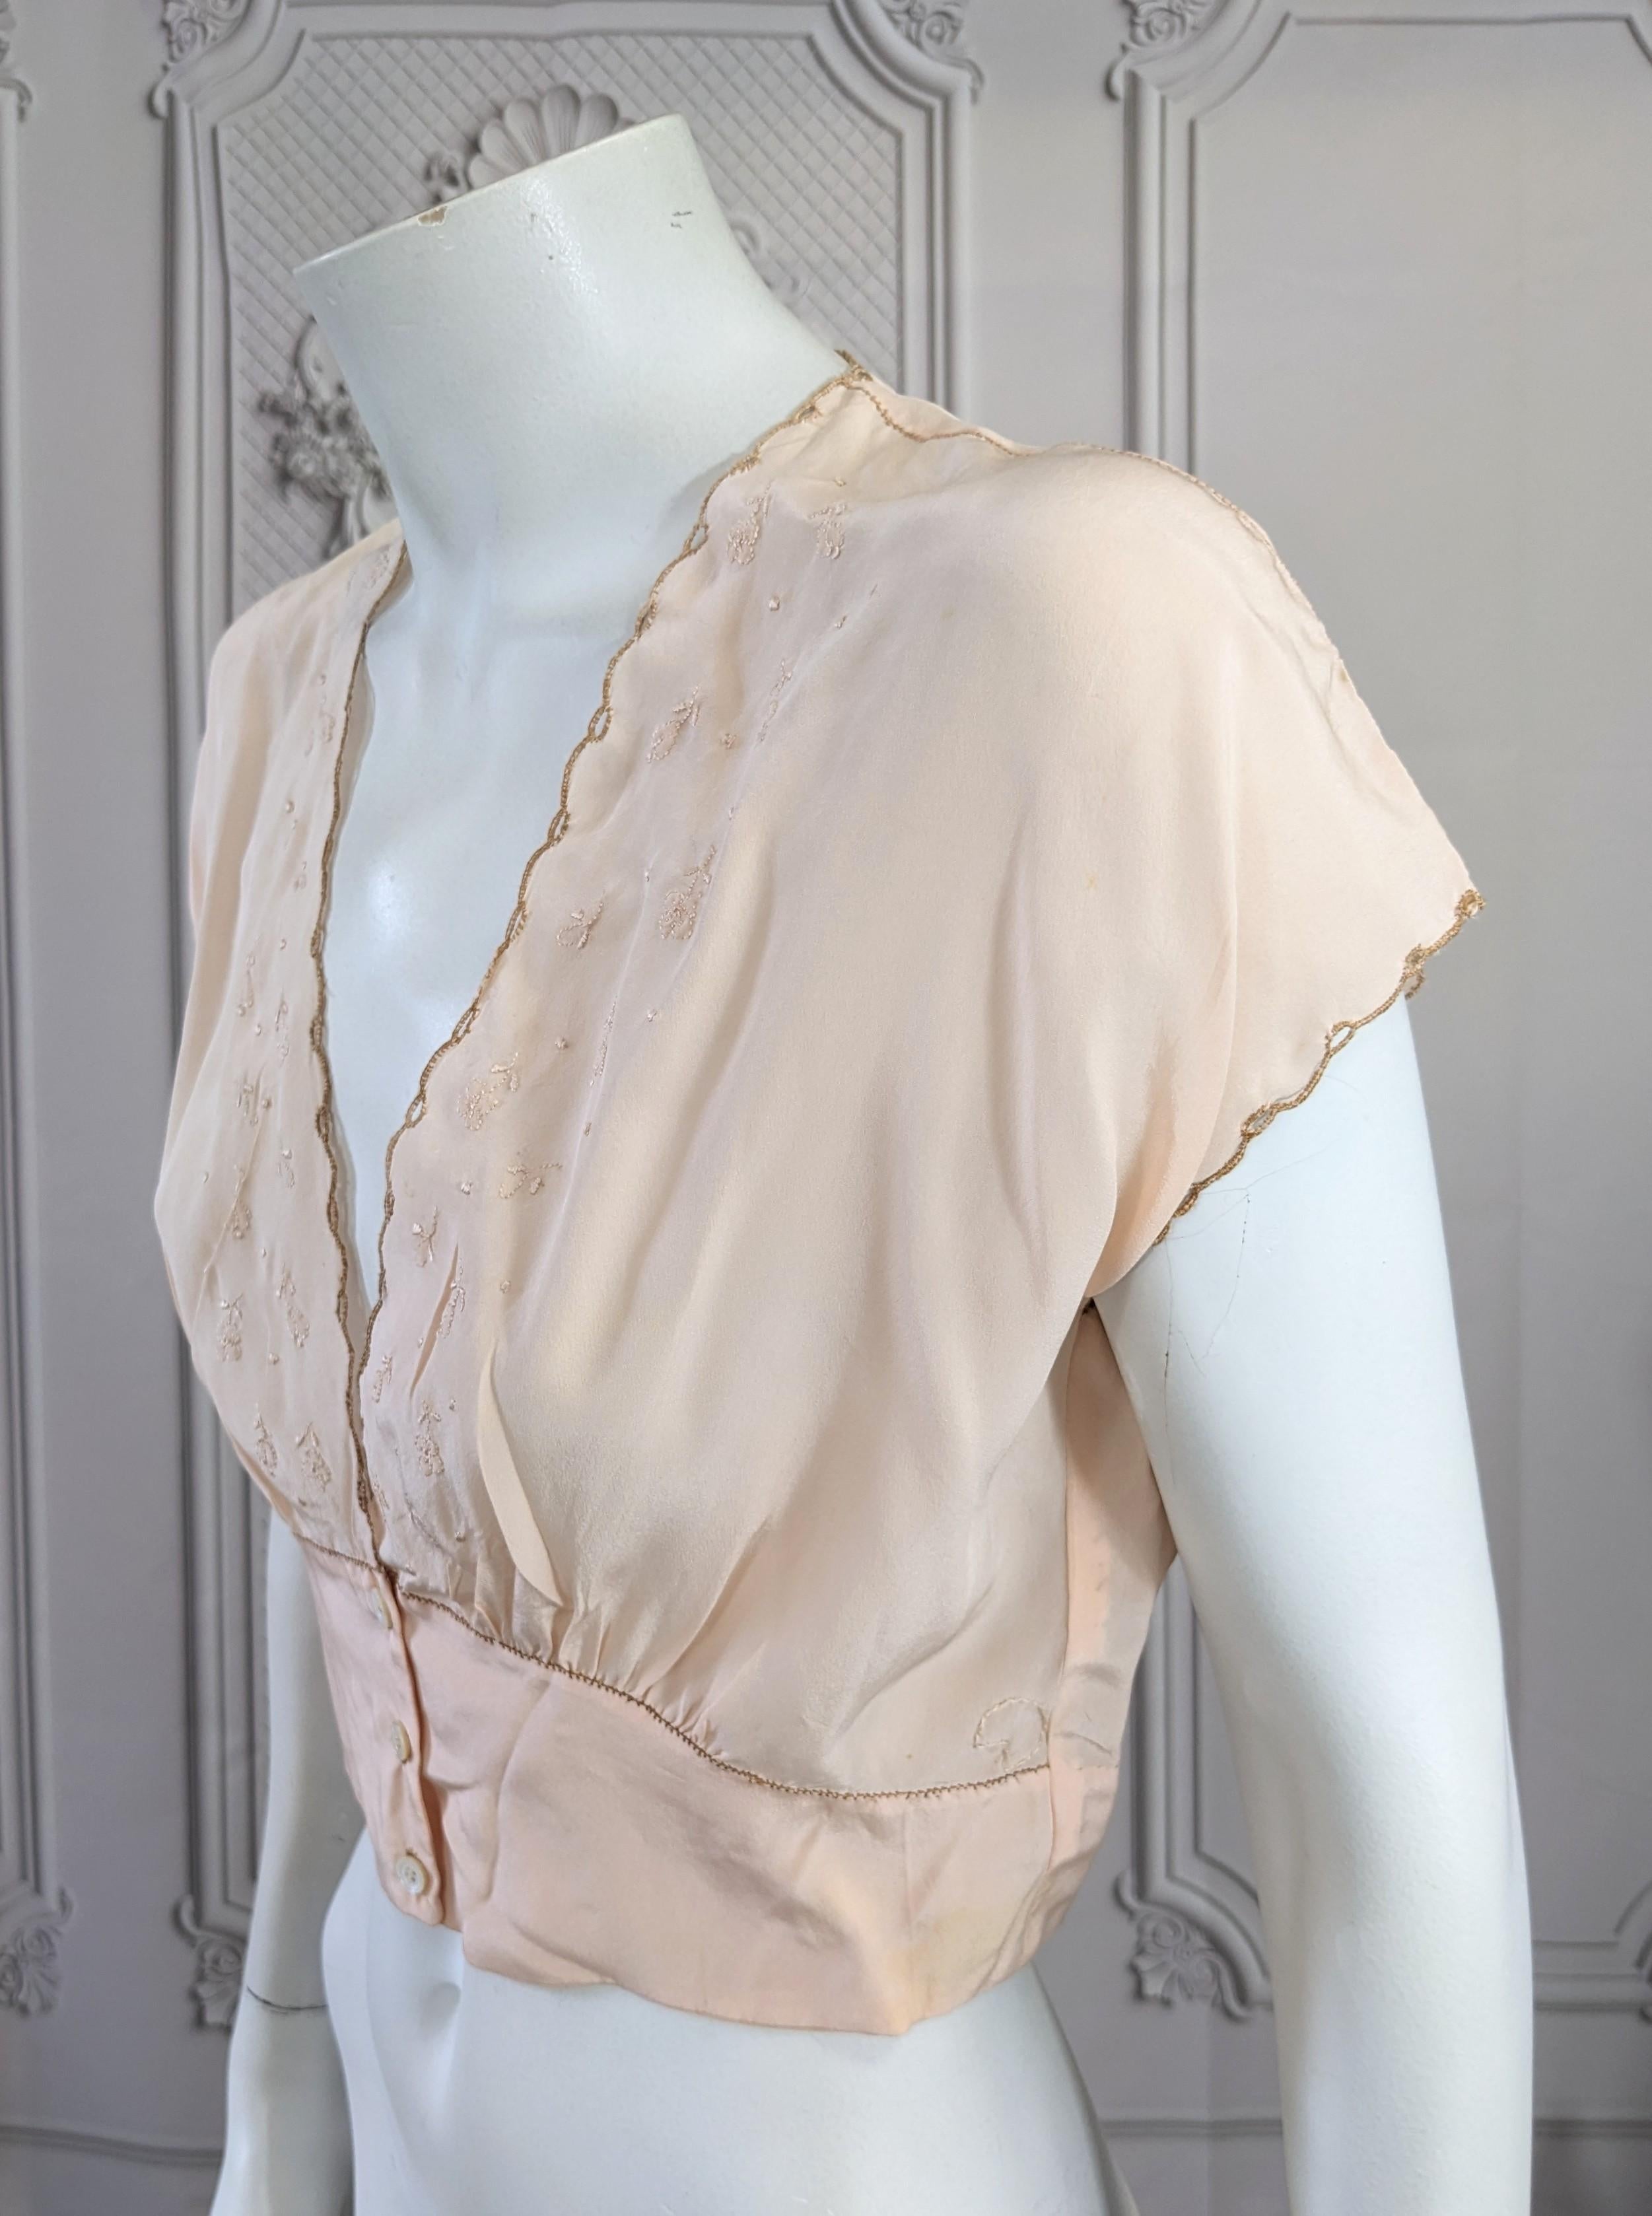 Upcycled Silk Crepe Art Deco Top, Studio VL In Good Condition For Sale In New York, NY